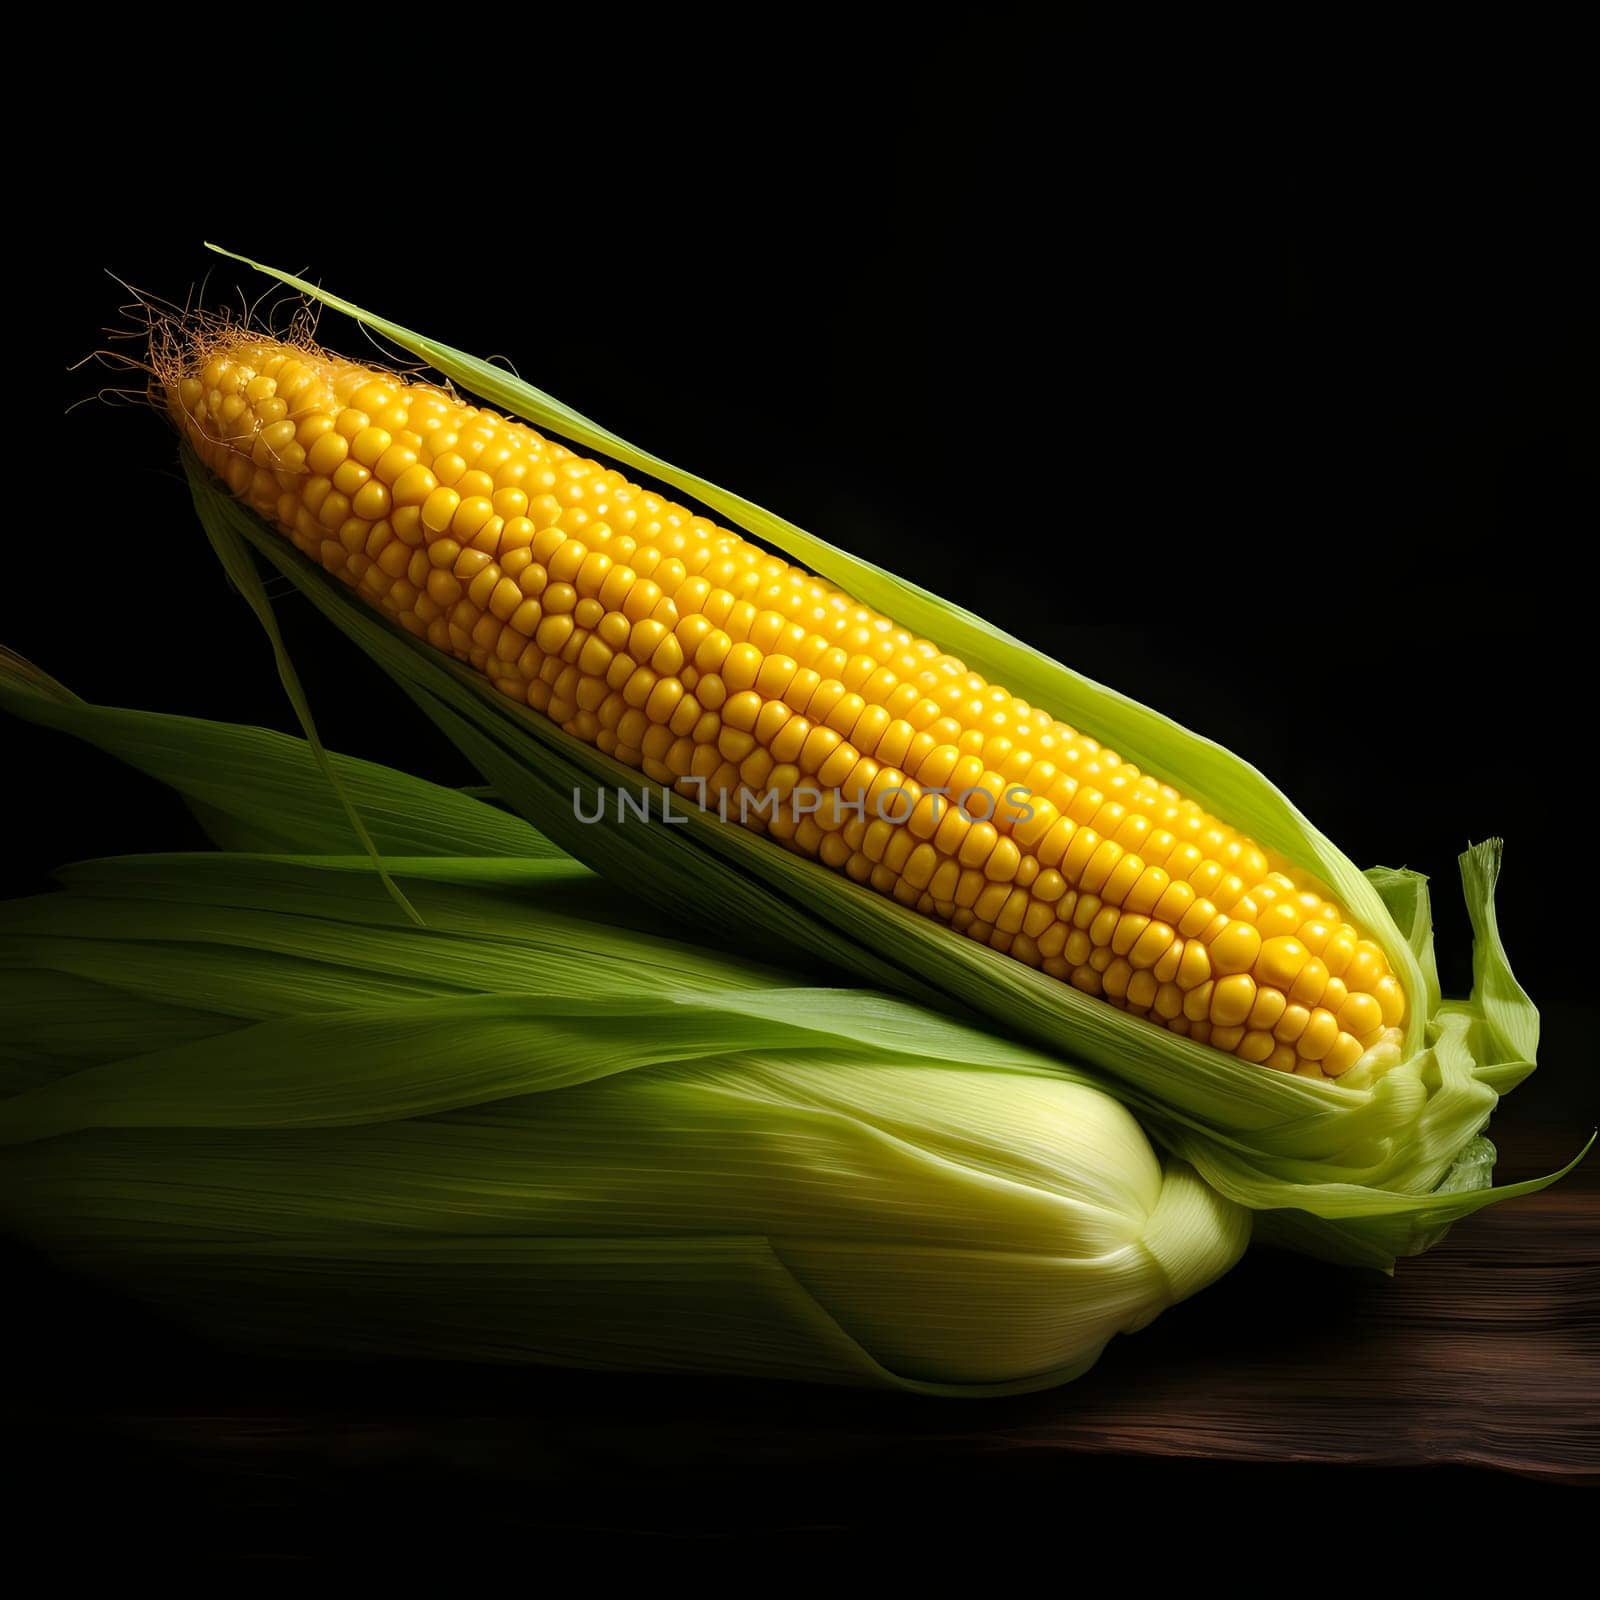 Two corn cobs one yellow the other in green Leaf on black background. Corn as a dish of thanksgiving for the harvest. An atmosphere of joy and celebration.